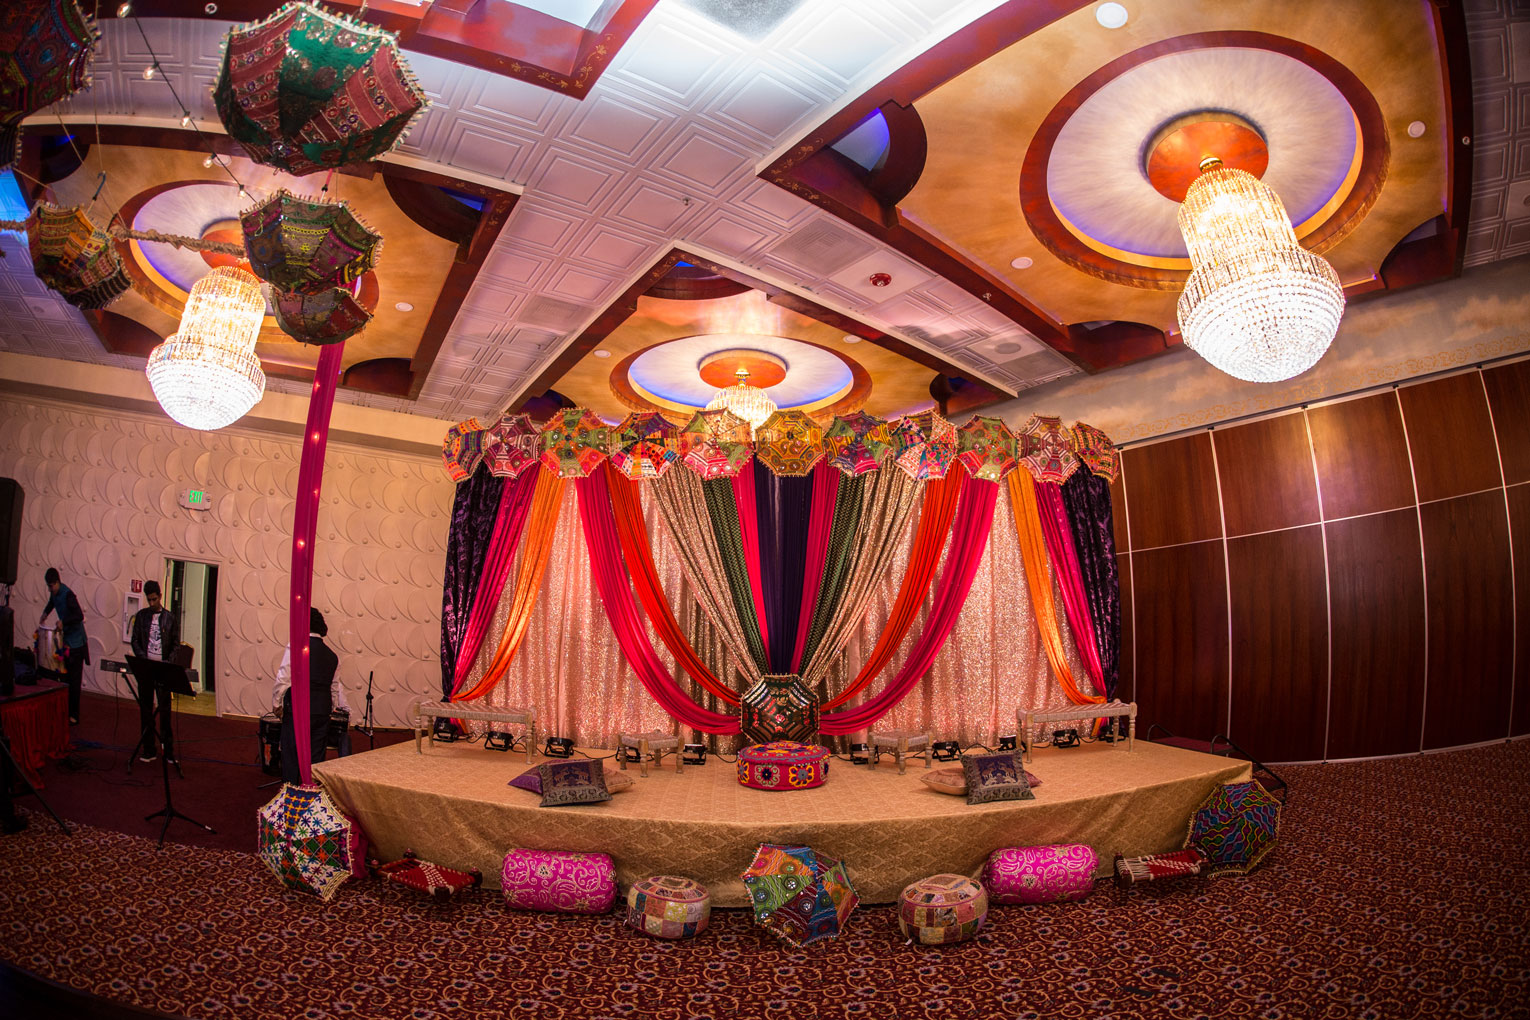 Bar Mitzvah, catering, royal palace, Fremont, Bay Area, banquet hall,